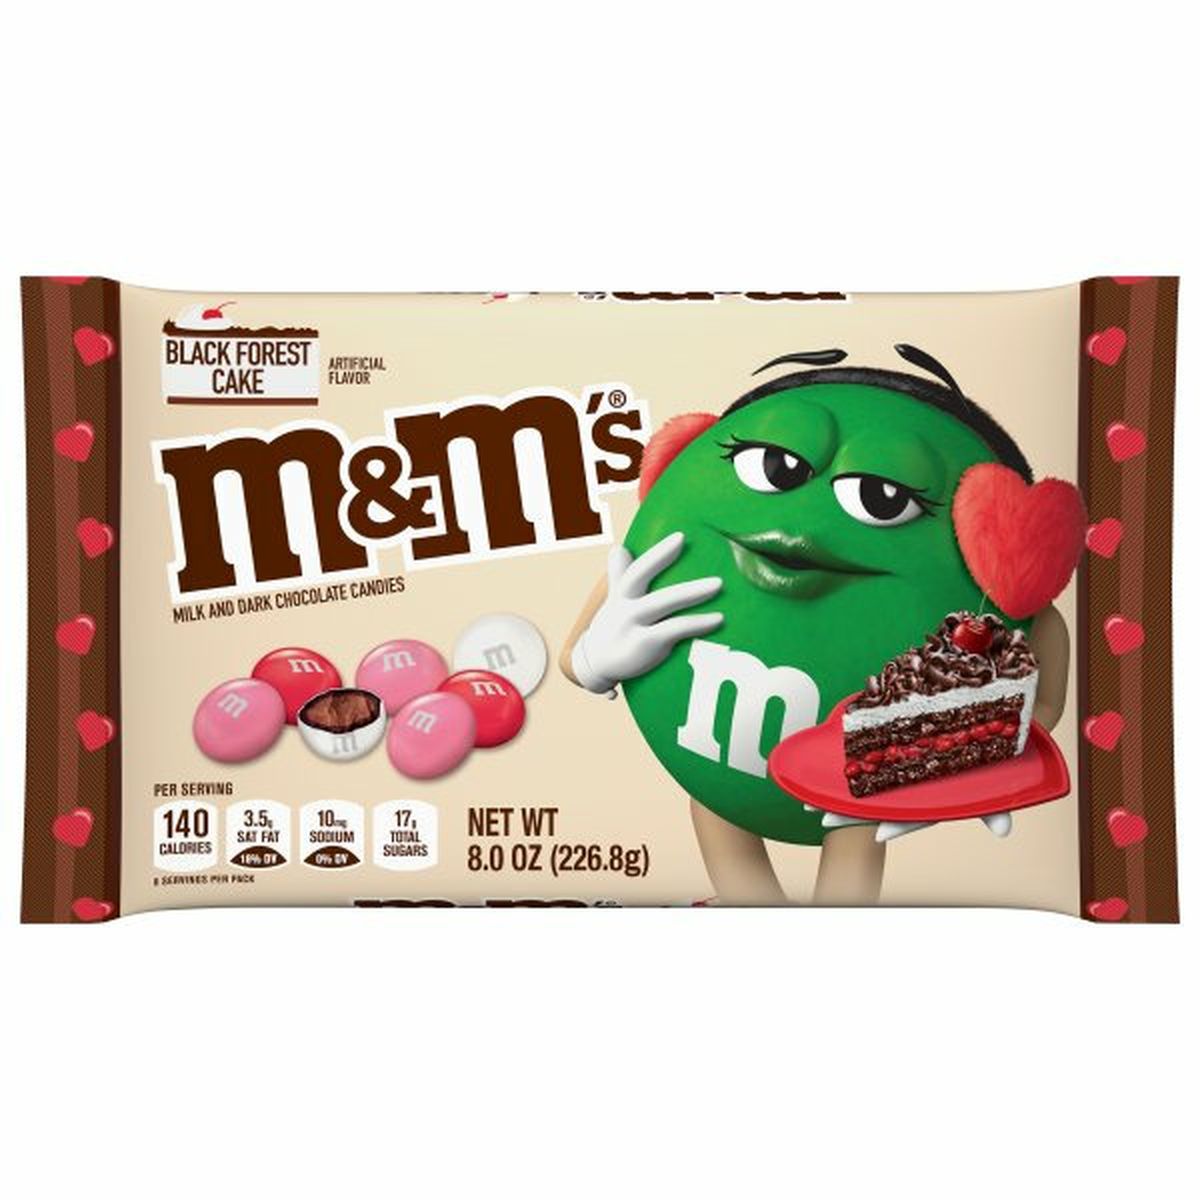 Calories in M&M's Chocolate Candies, Black Forest Cake